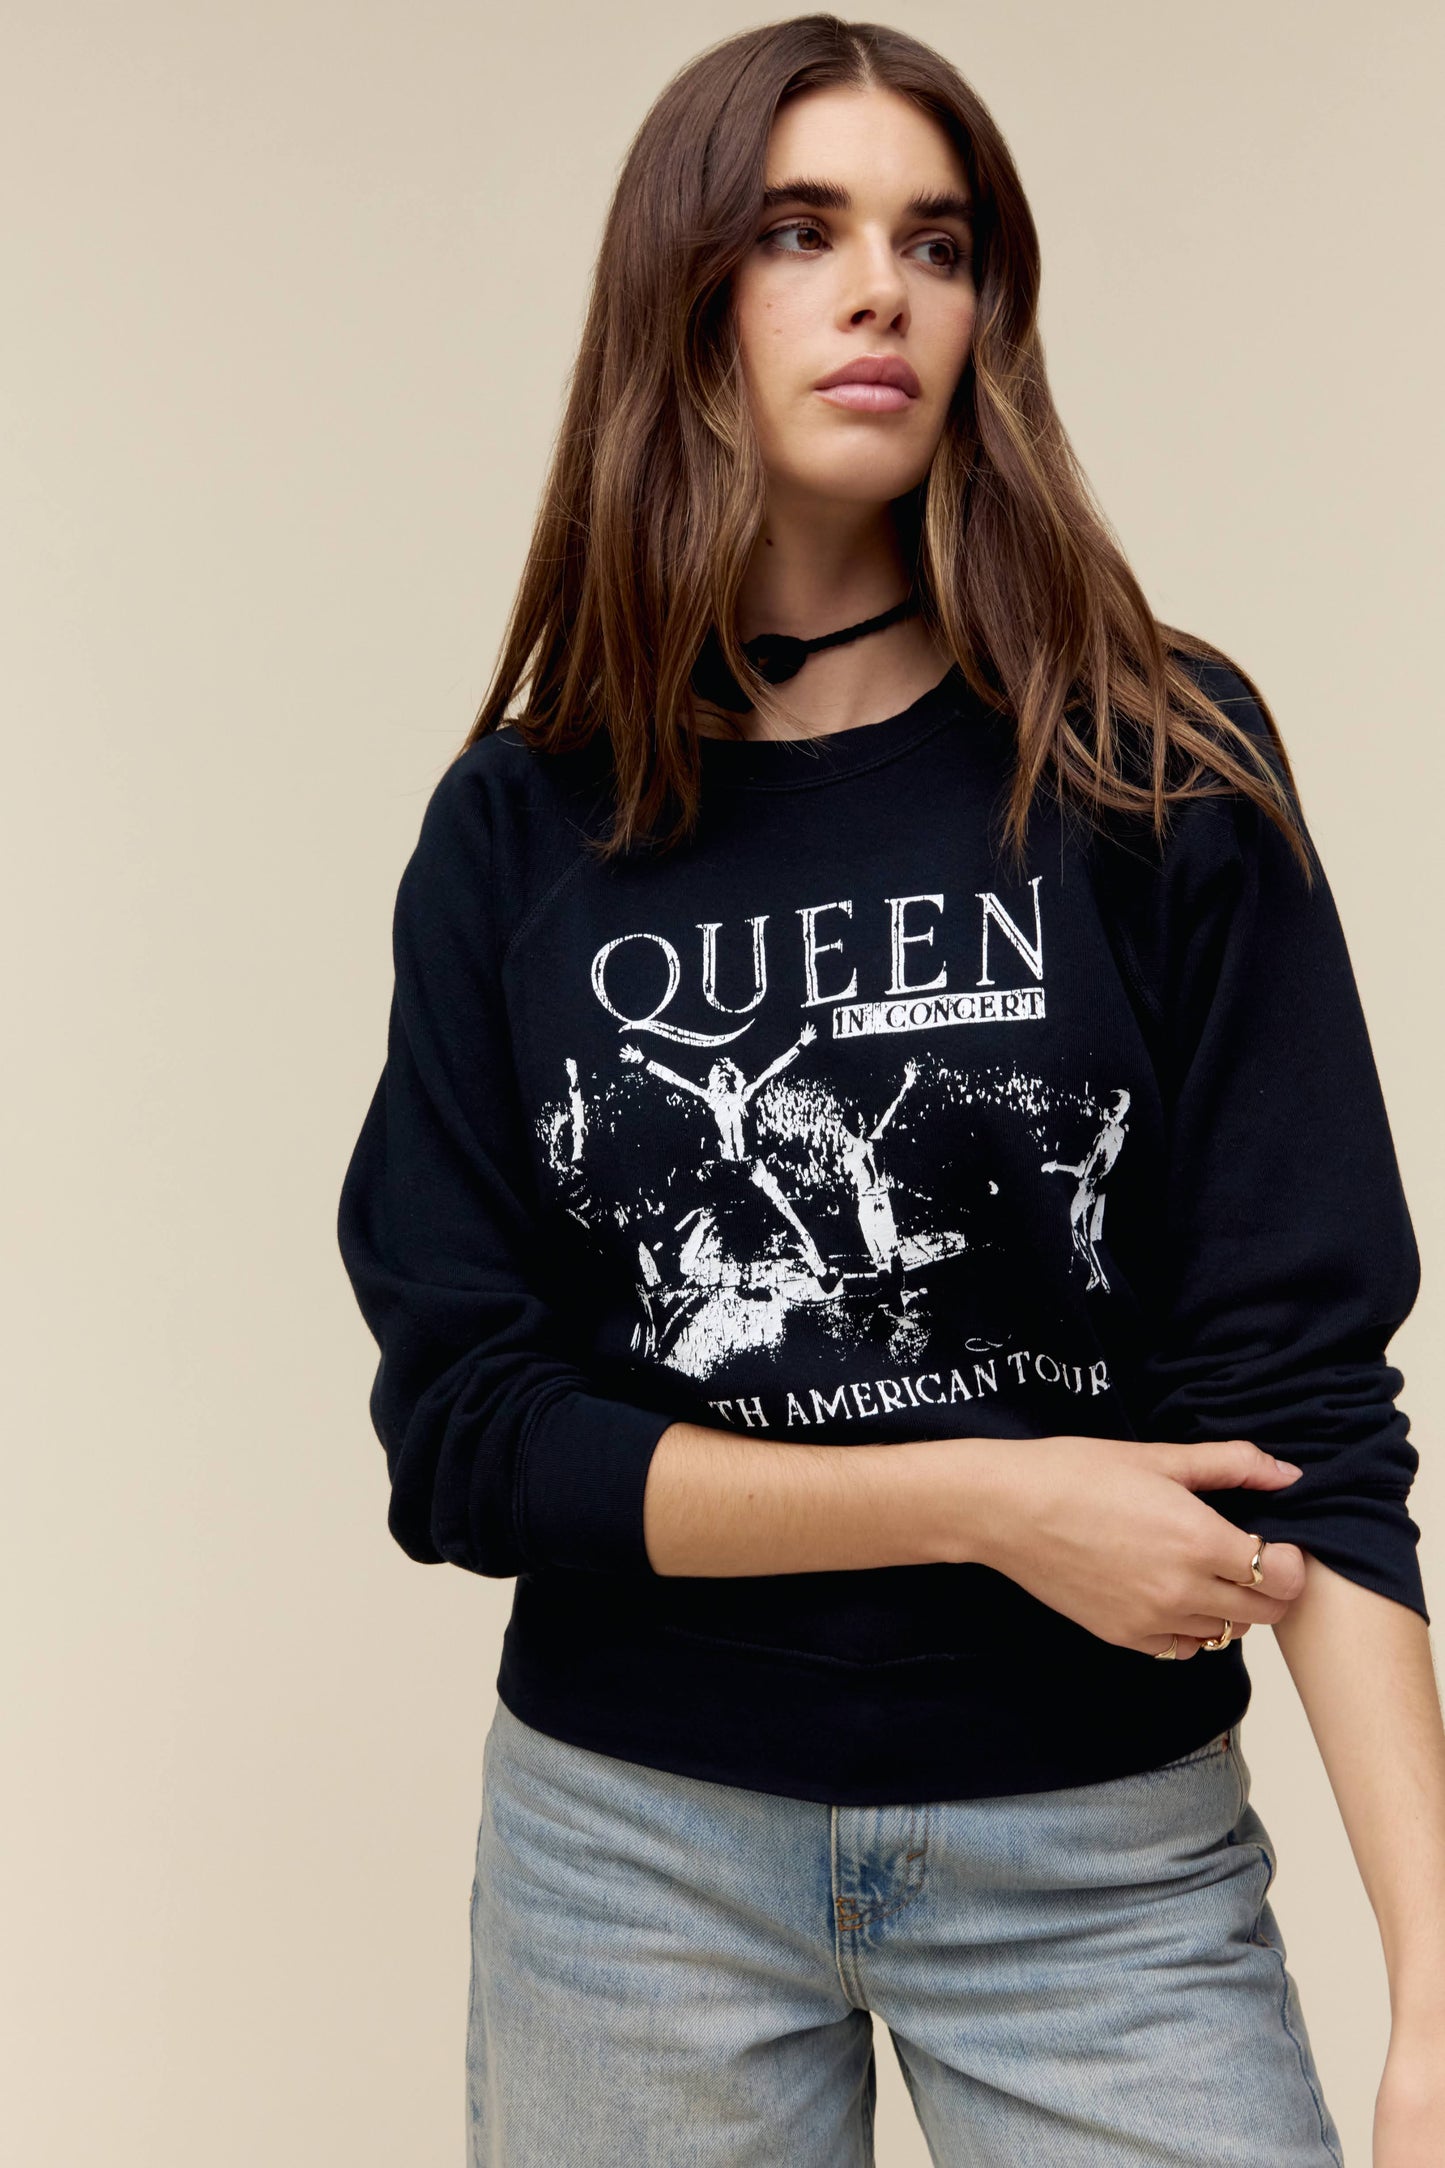 A model featuring a black raglan crew stamped with Queen in front and a list of tour dates and places at the back.